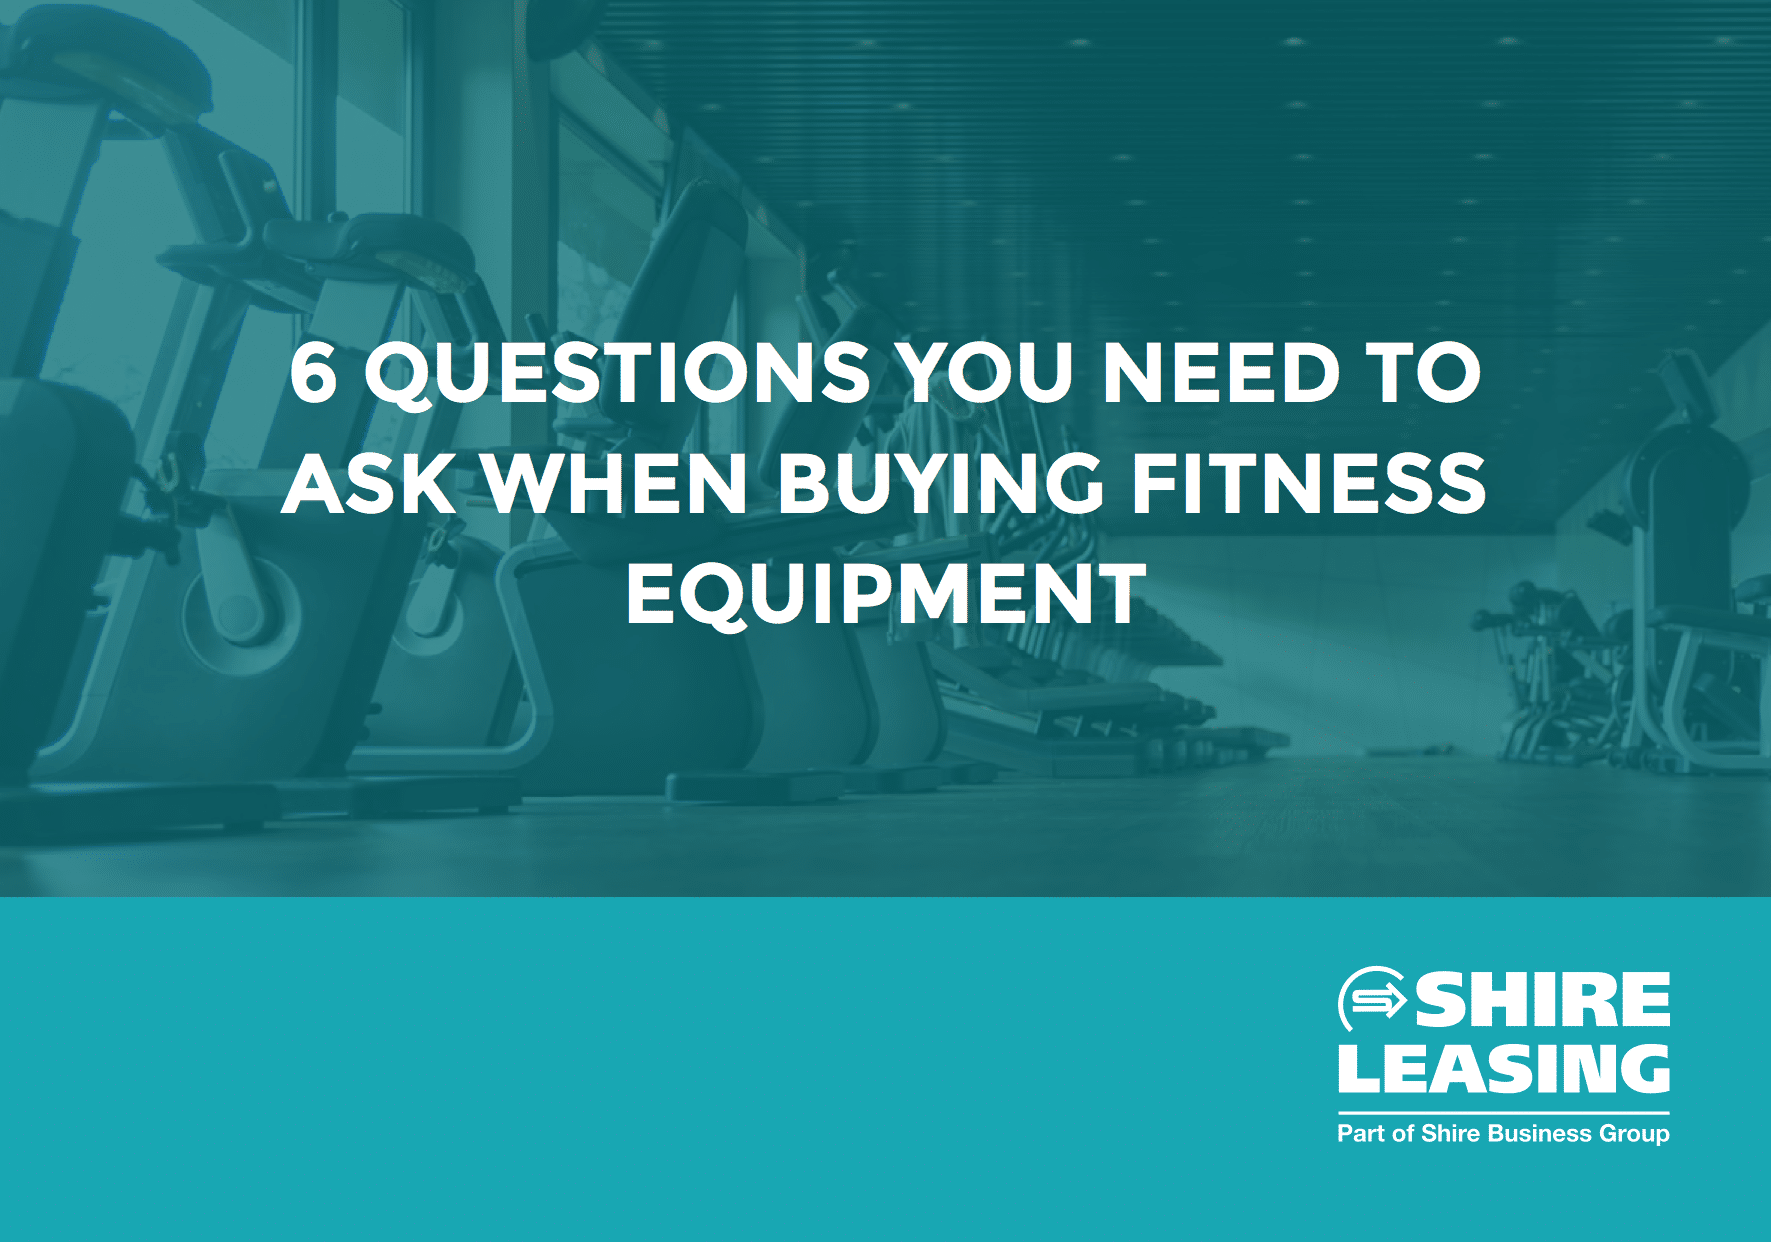 Questions to ask when purchasing fitness equipment